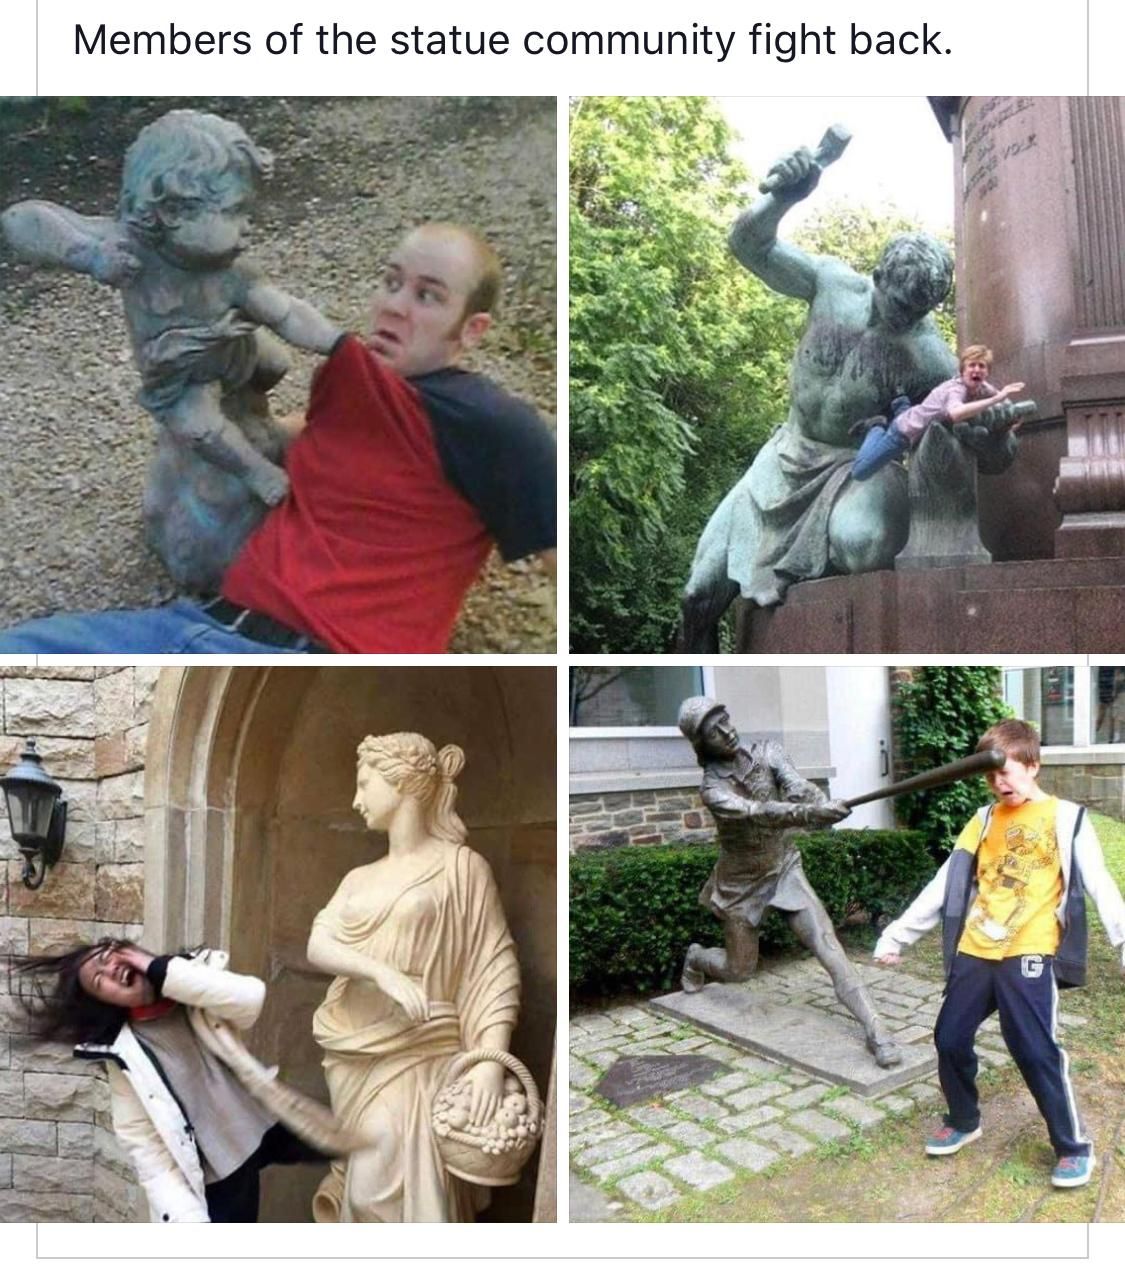 Statues fighting back